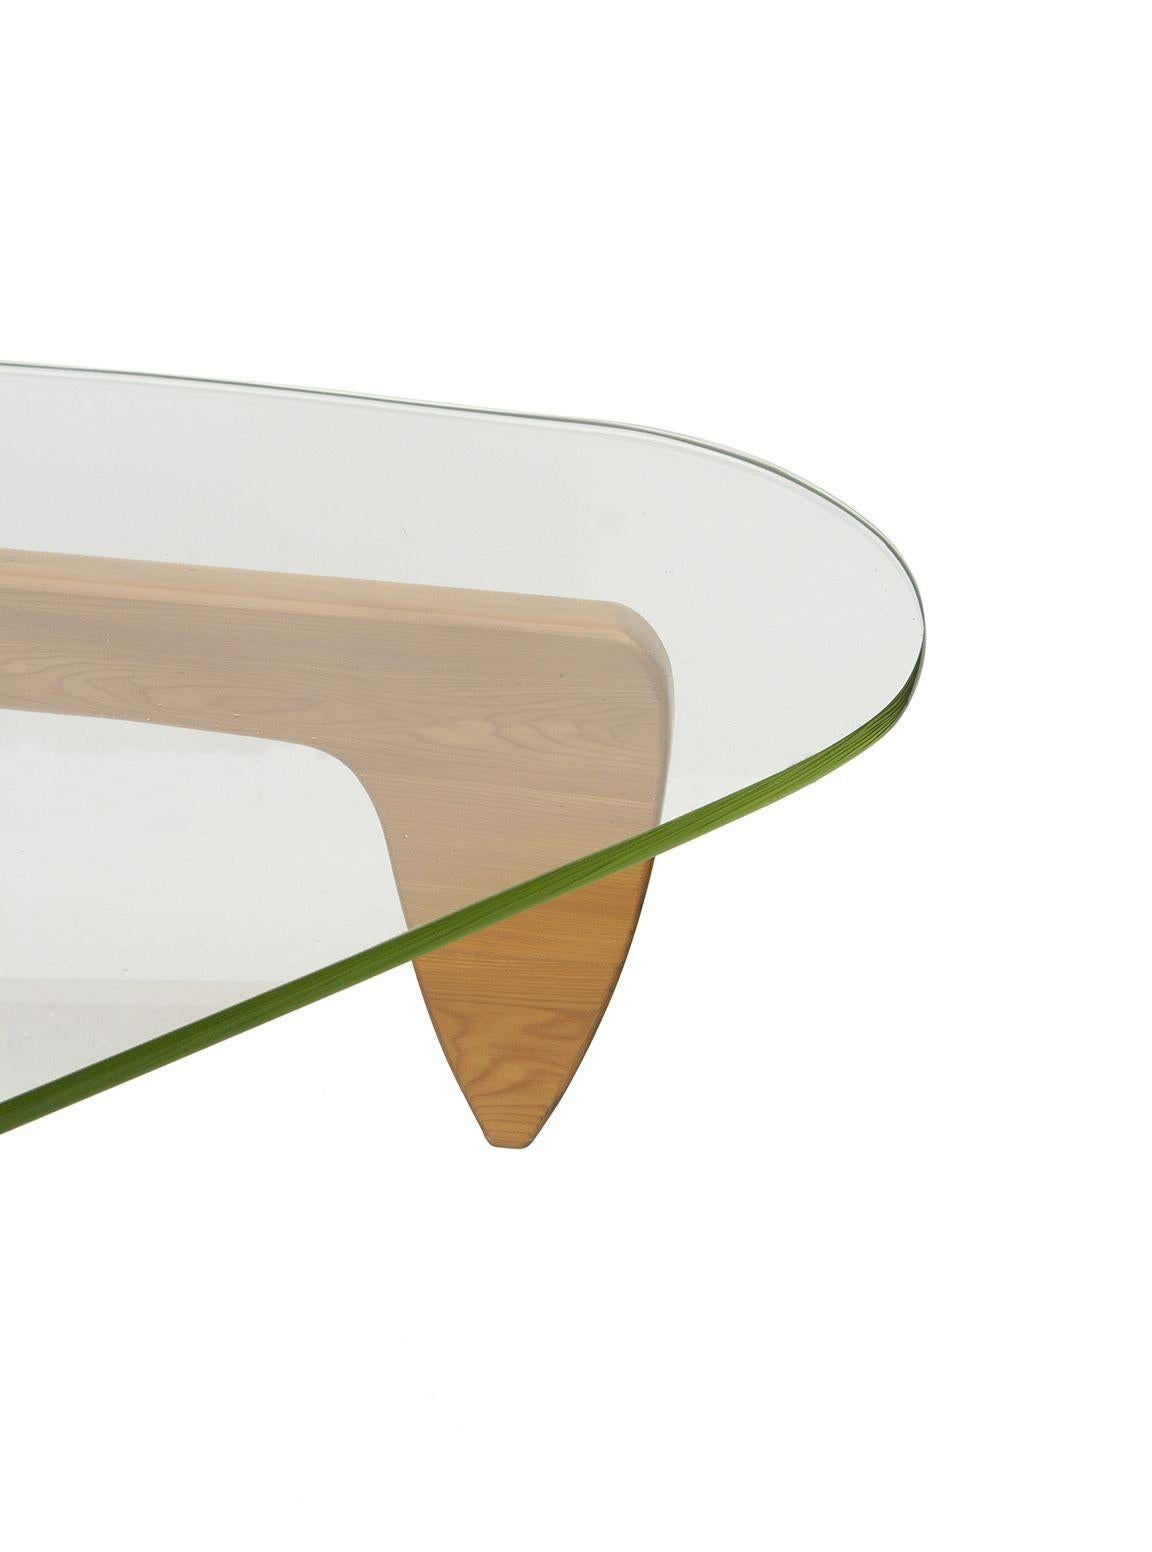 Early IN-50 Coffee Table with Green Glass by Isamu Noguchi For Sale 2